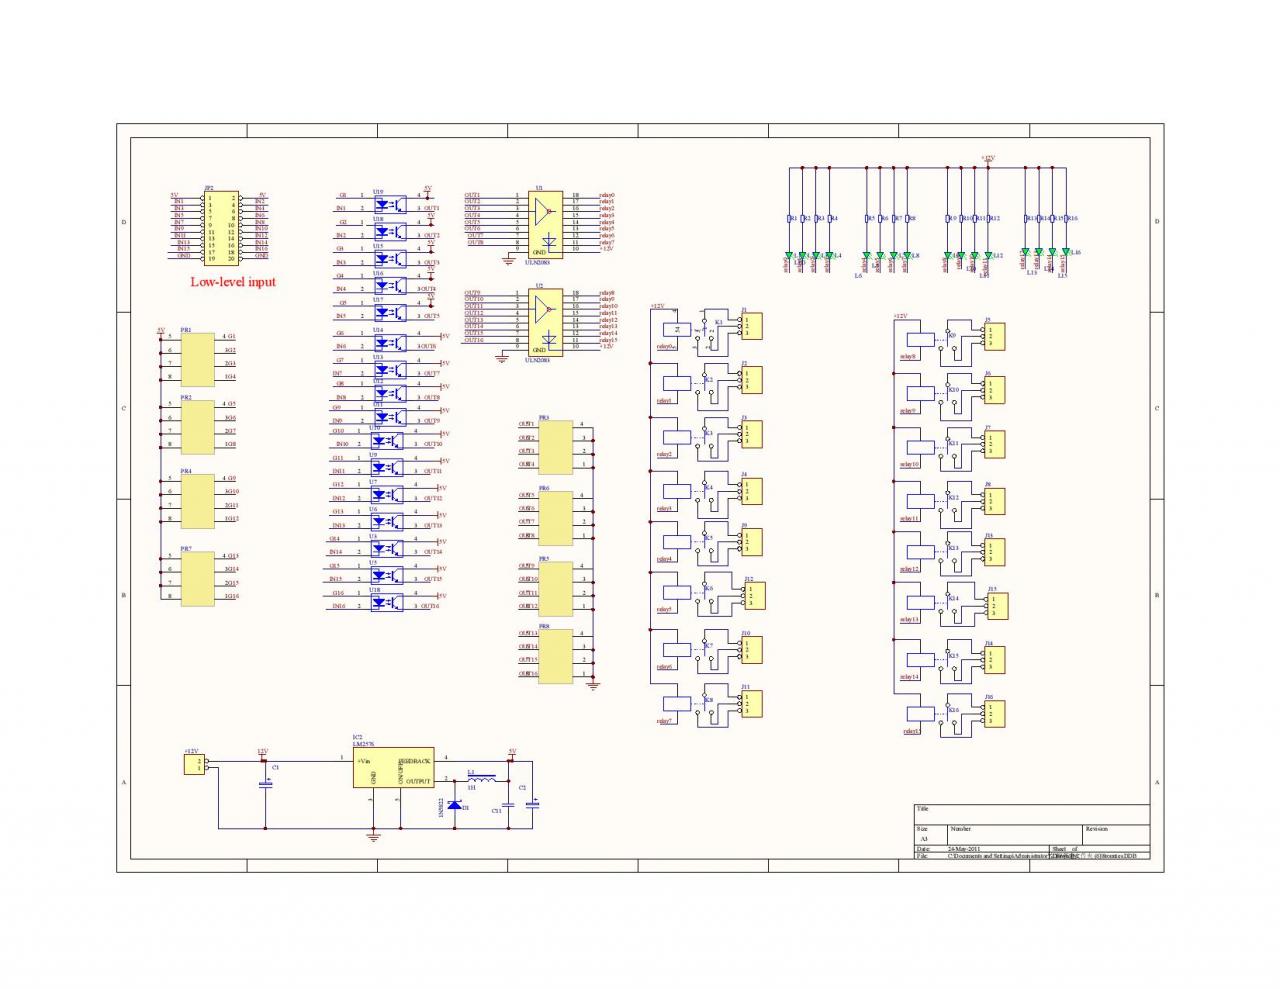 Nom : 16 channel relay board-page-001.jpg
Affichages : 573
Taille : 110,4 Ko